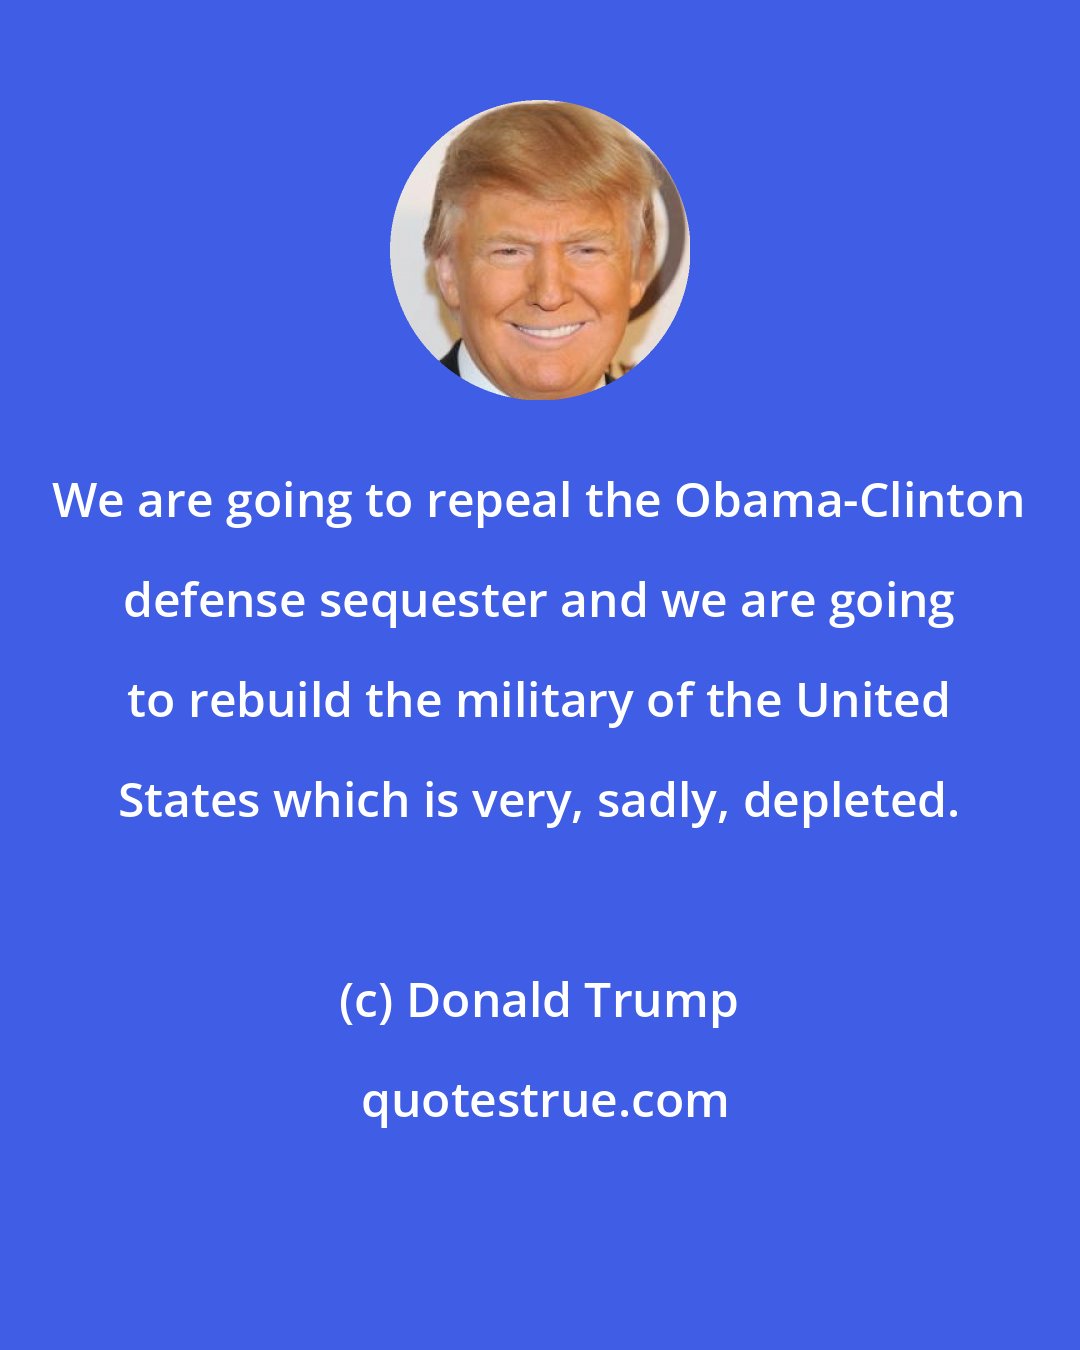 Donald Trump: We are going to repeal the Obama-Clinton defense sequester and we are going to rebuild the military of the United States which is very, sadly, depleted.